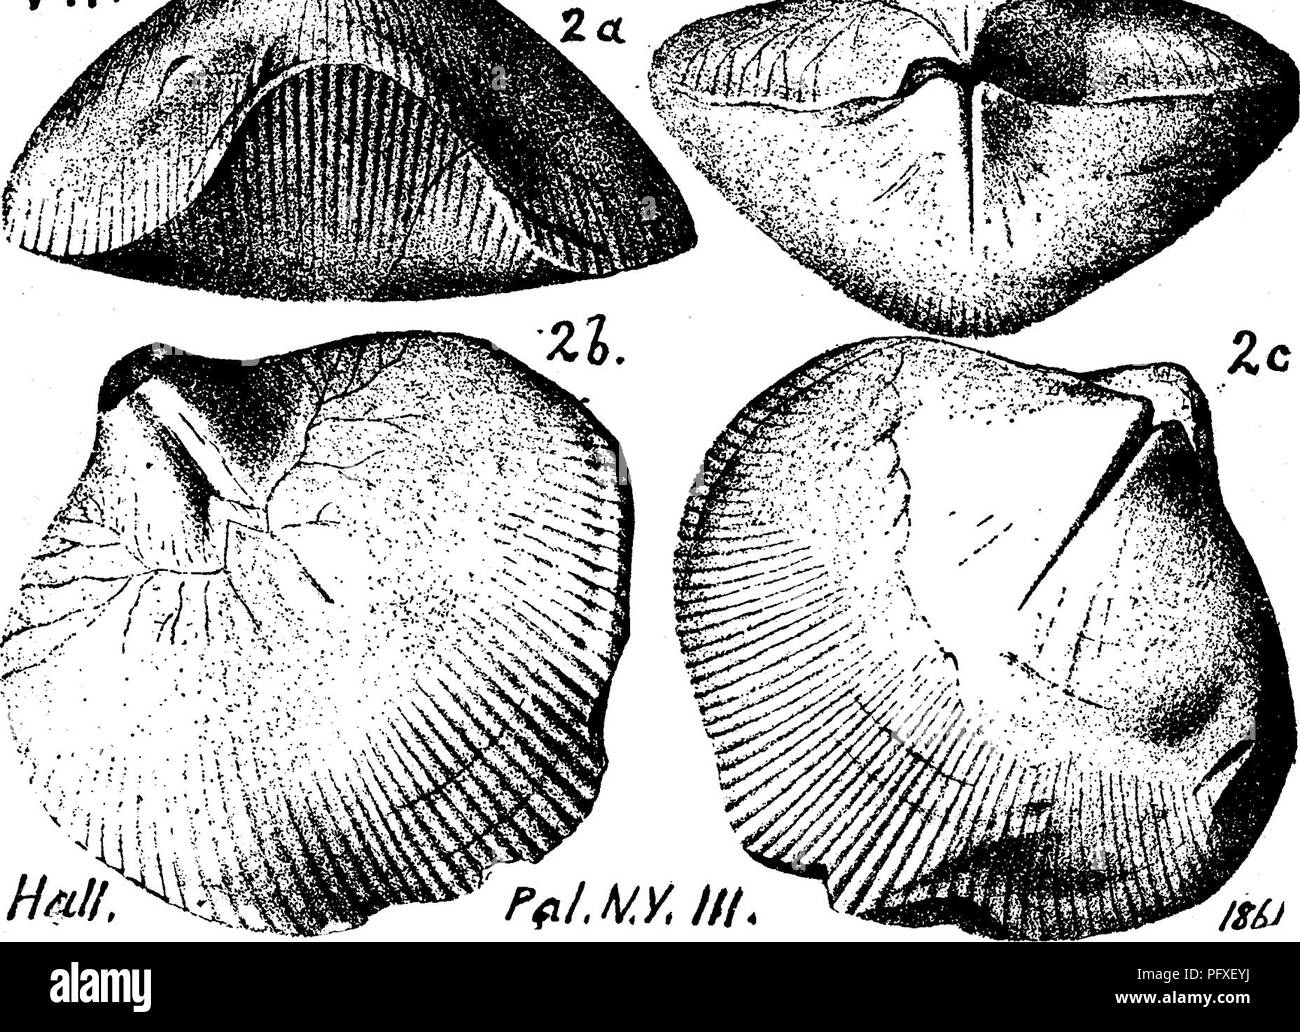 . A dictionary of the fossils of Pennsylvania and neighboring states named in the reports and catalogues of the survey ... Paleontology. Rhyn. 896 Rhynchonella oblata, Hall. 10th Regts. Kt. 1857. Pal.. N. Y. Vol. 3,1859,1861, p. 439, plate 102, fig. 2 a, cast, front view of young one, showing broad shallow sinus; J, another cast, ventral side, with muscular area, and ramifying vascular impressions (not very exactly drawn); &lt;?, d^ dorsal and cardi- nal views of same; radiating striae preserved on lower half of cast. Oriskany sandstone^ Albany Co., N. Y.—In Pennsylva- nia, found by White, at  Stock Photo